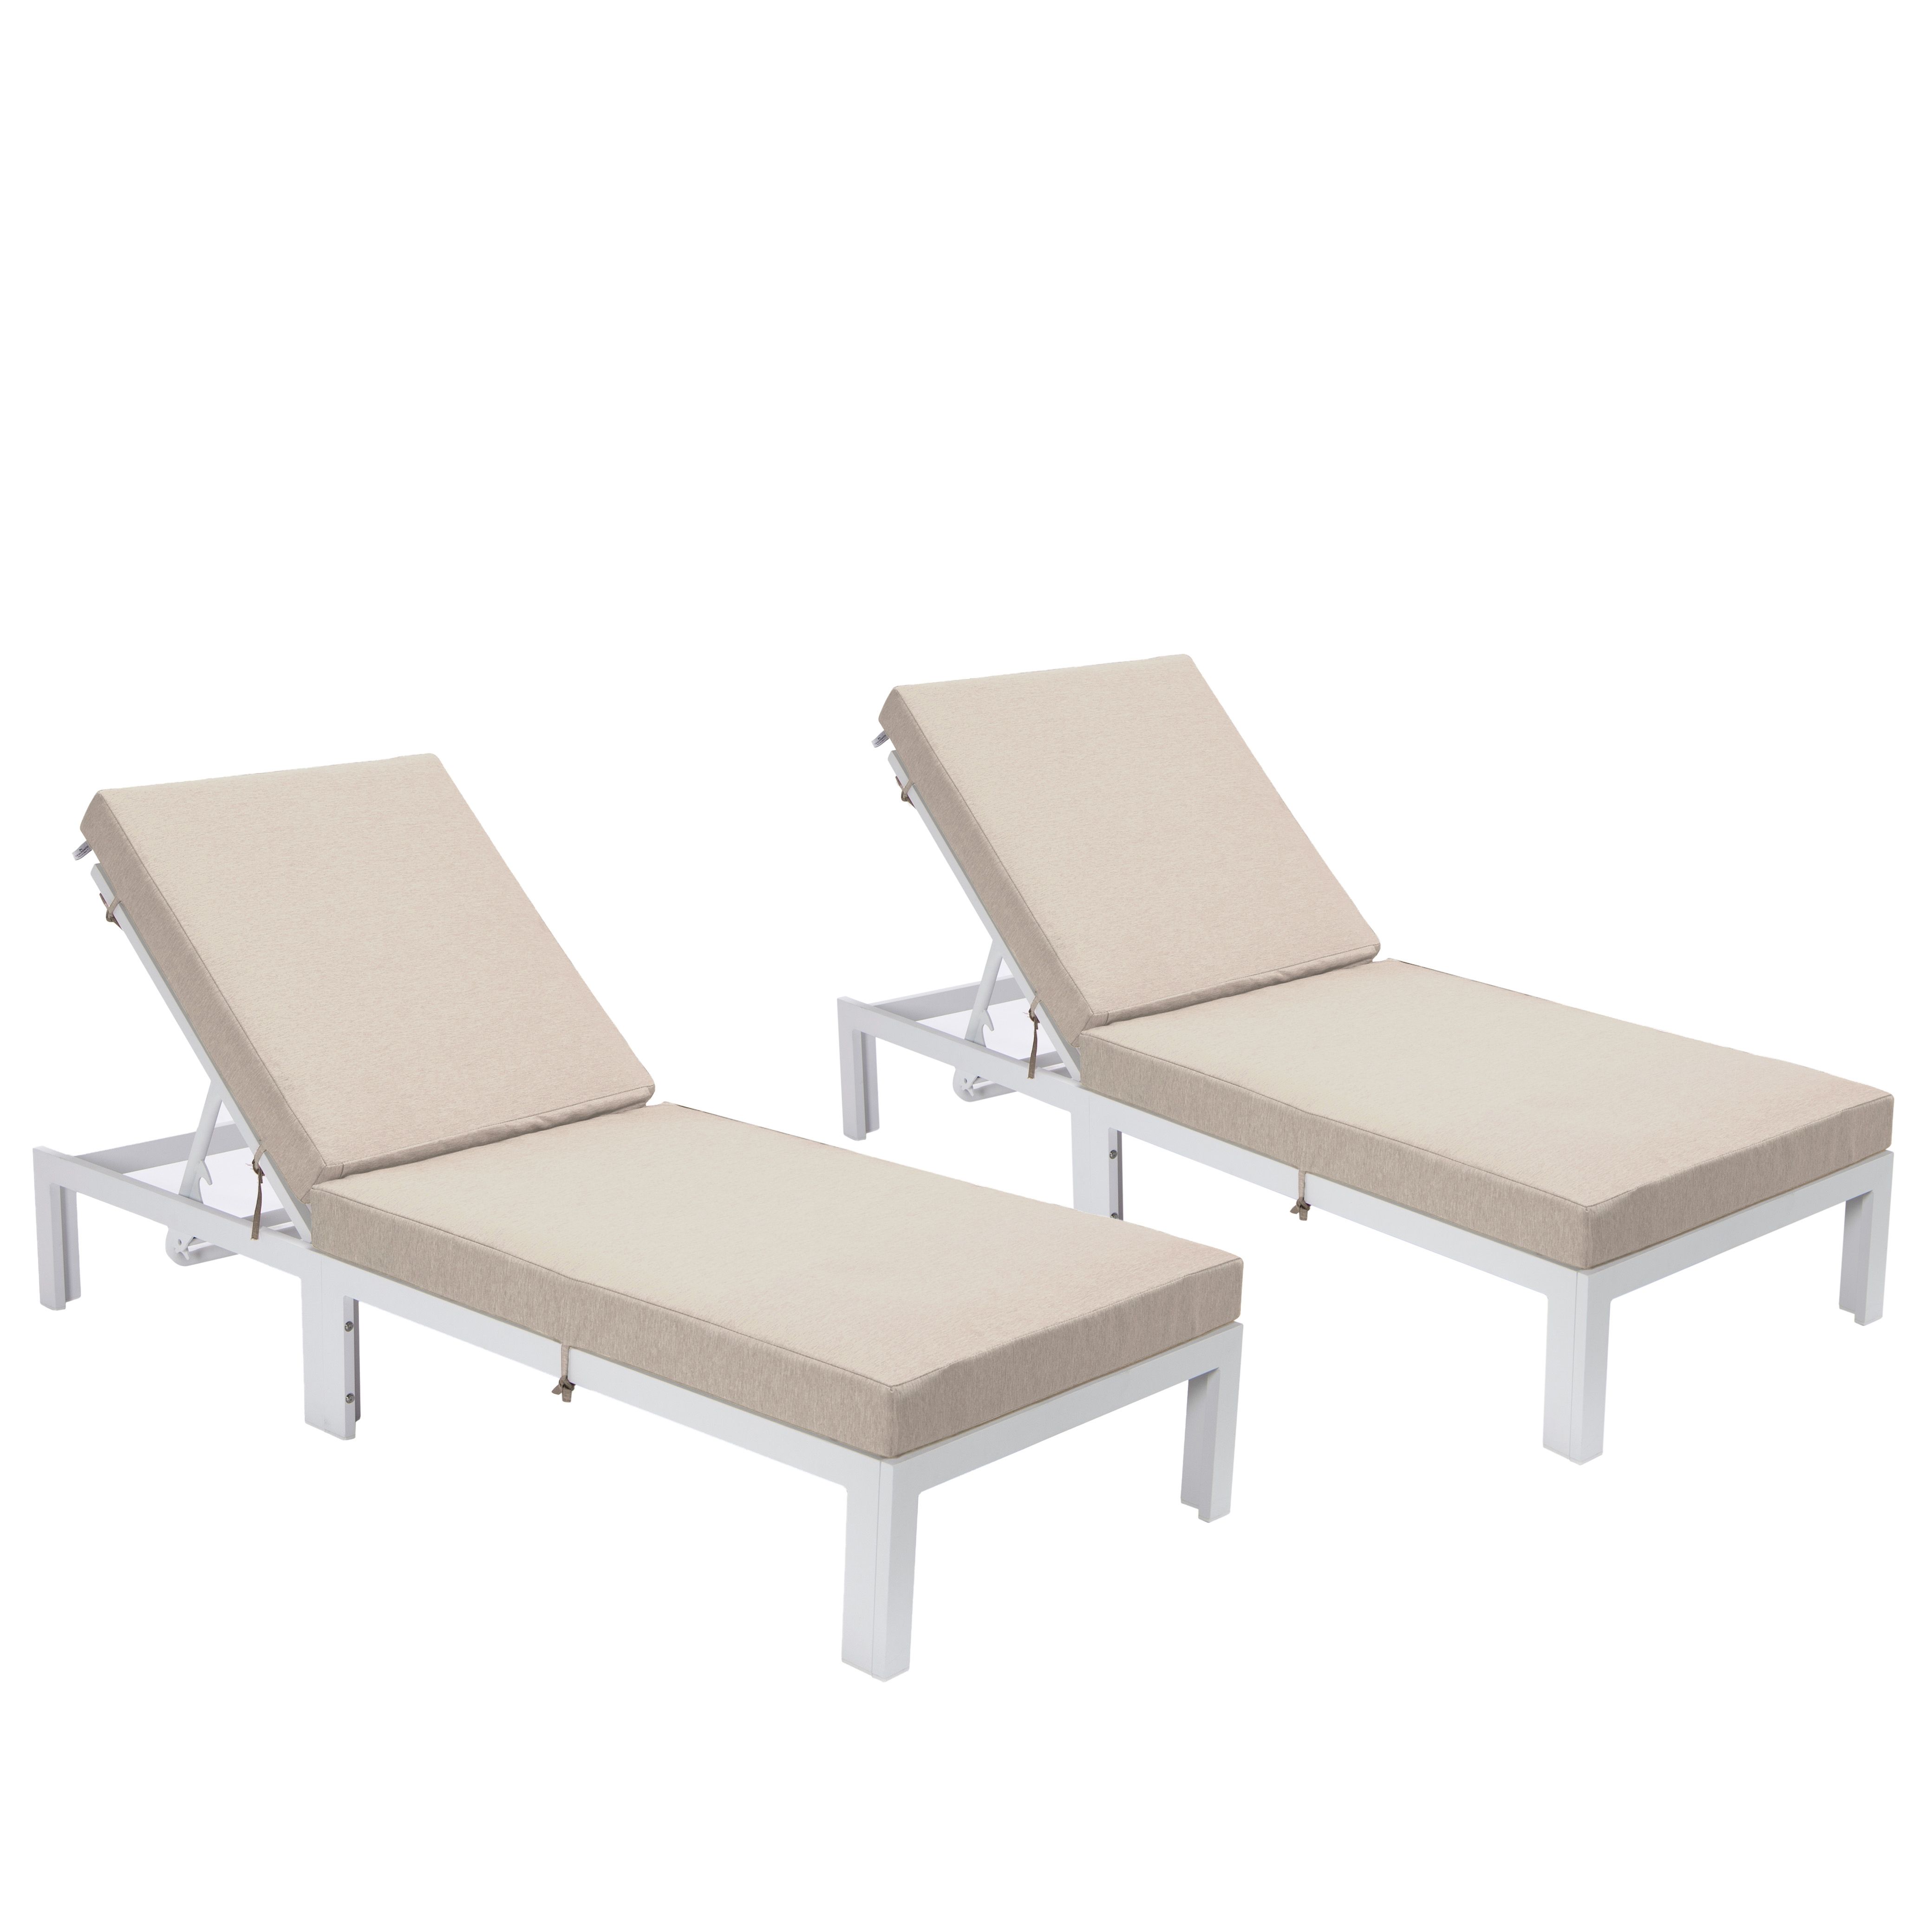 LeisureMod Chelsea Modern Outdoor White Chaise Lounge Chair With Cushions Set of 2 Beige